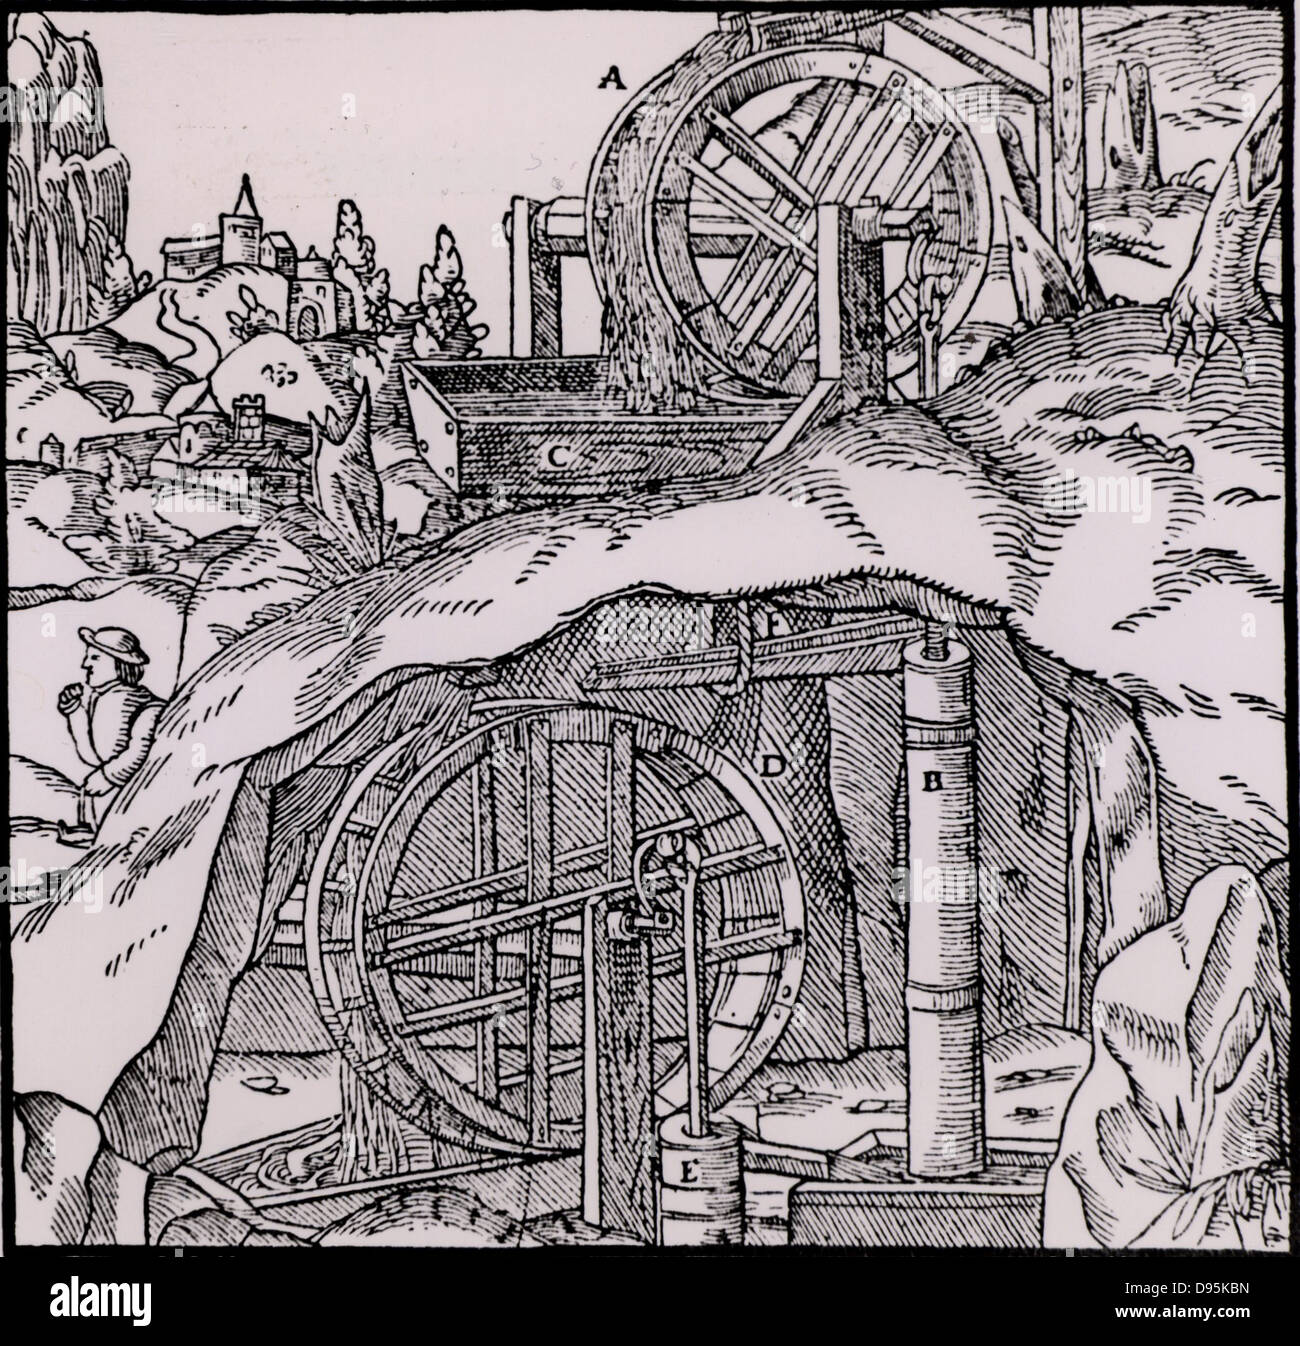 Raising water from a mine using two sets of overshot water wheels and suction pumps.  From 'De re metallica', by Agricola, pseudonym of Georg Bauer (Basle, 1556).  Woodcut. Stock Photo